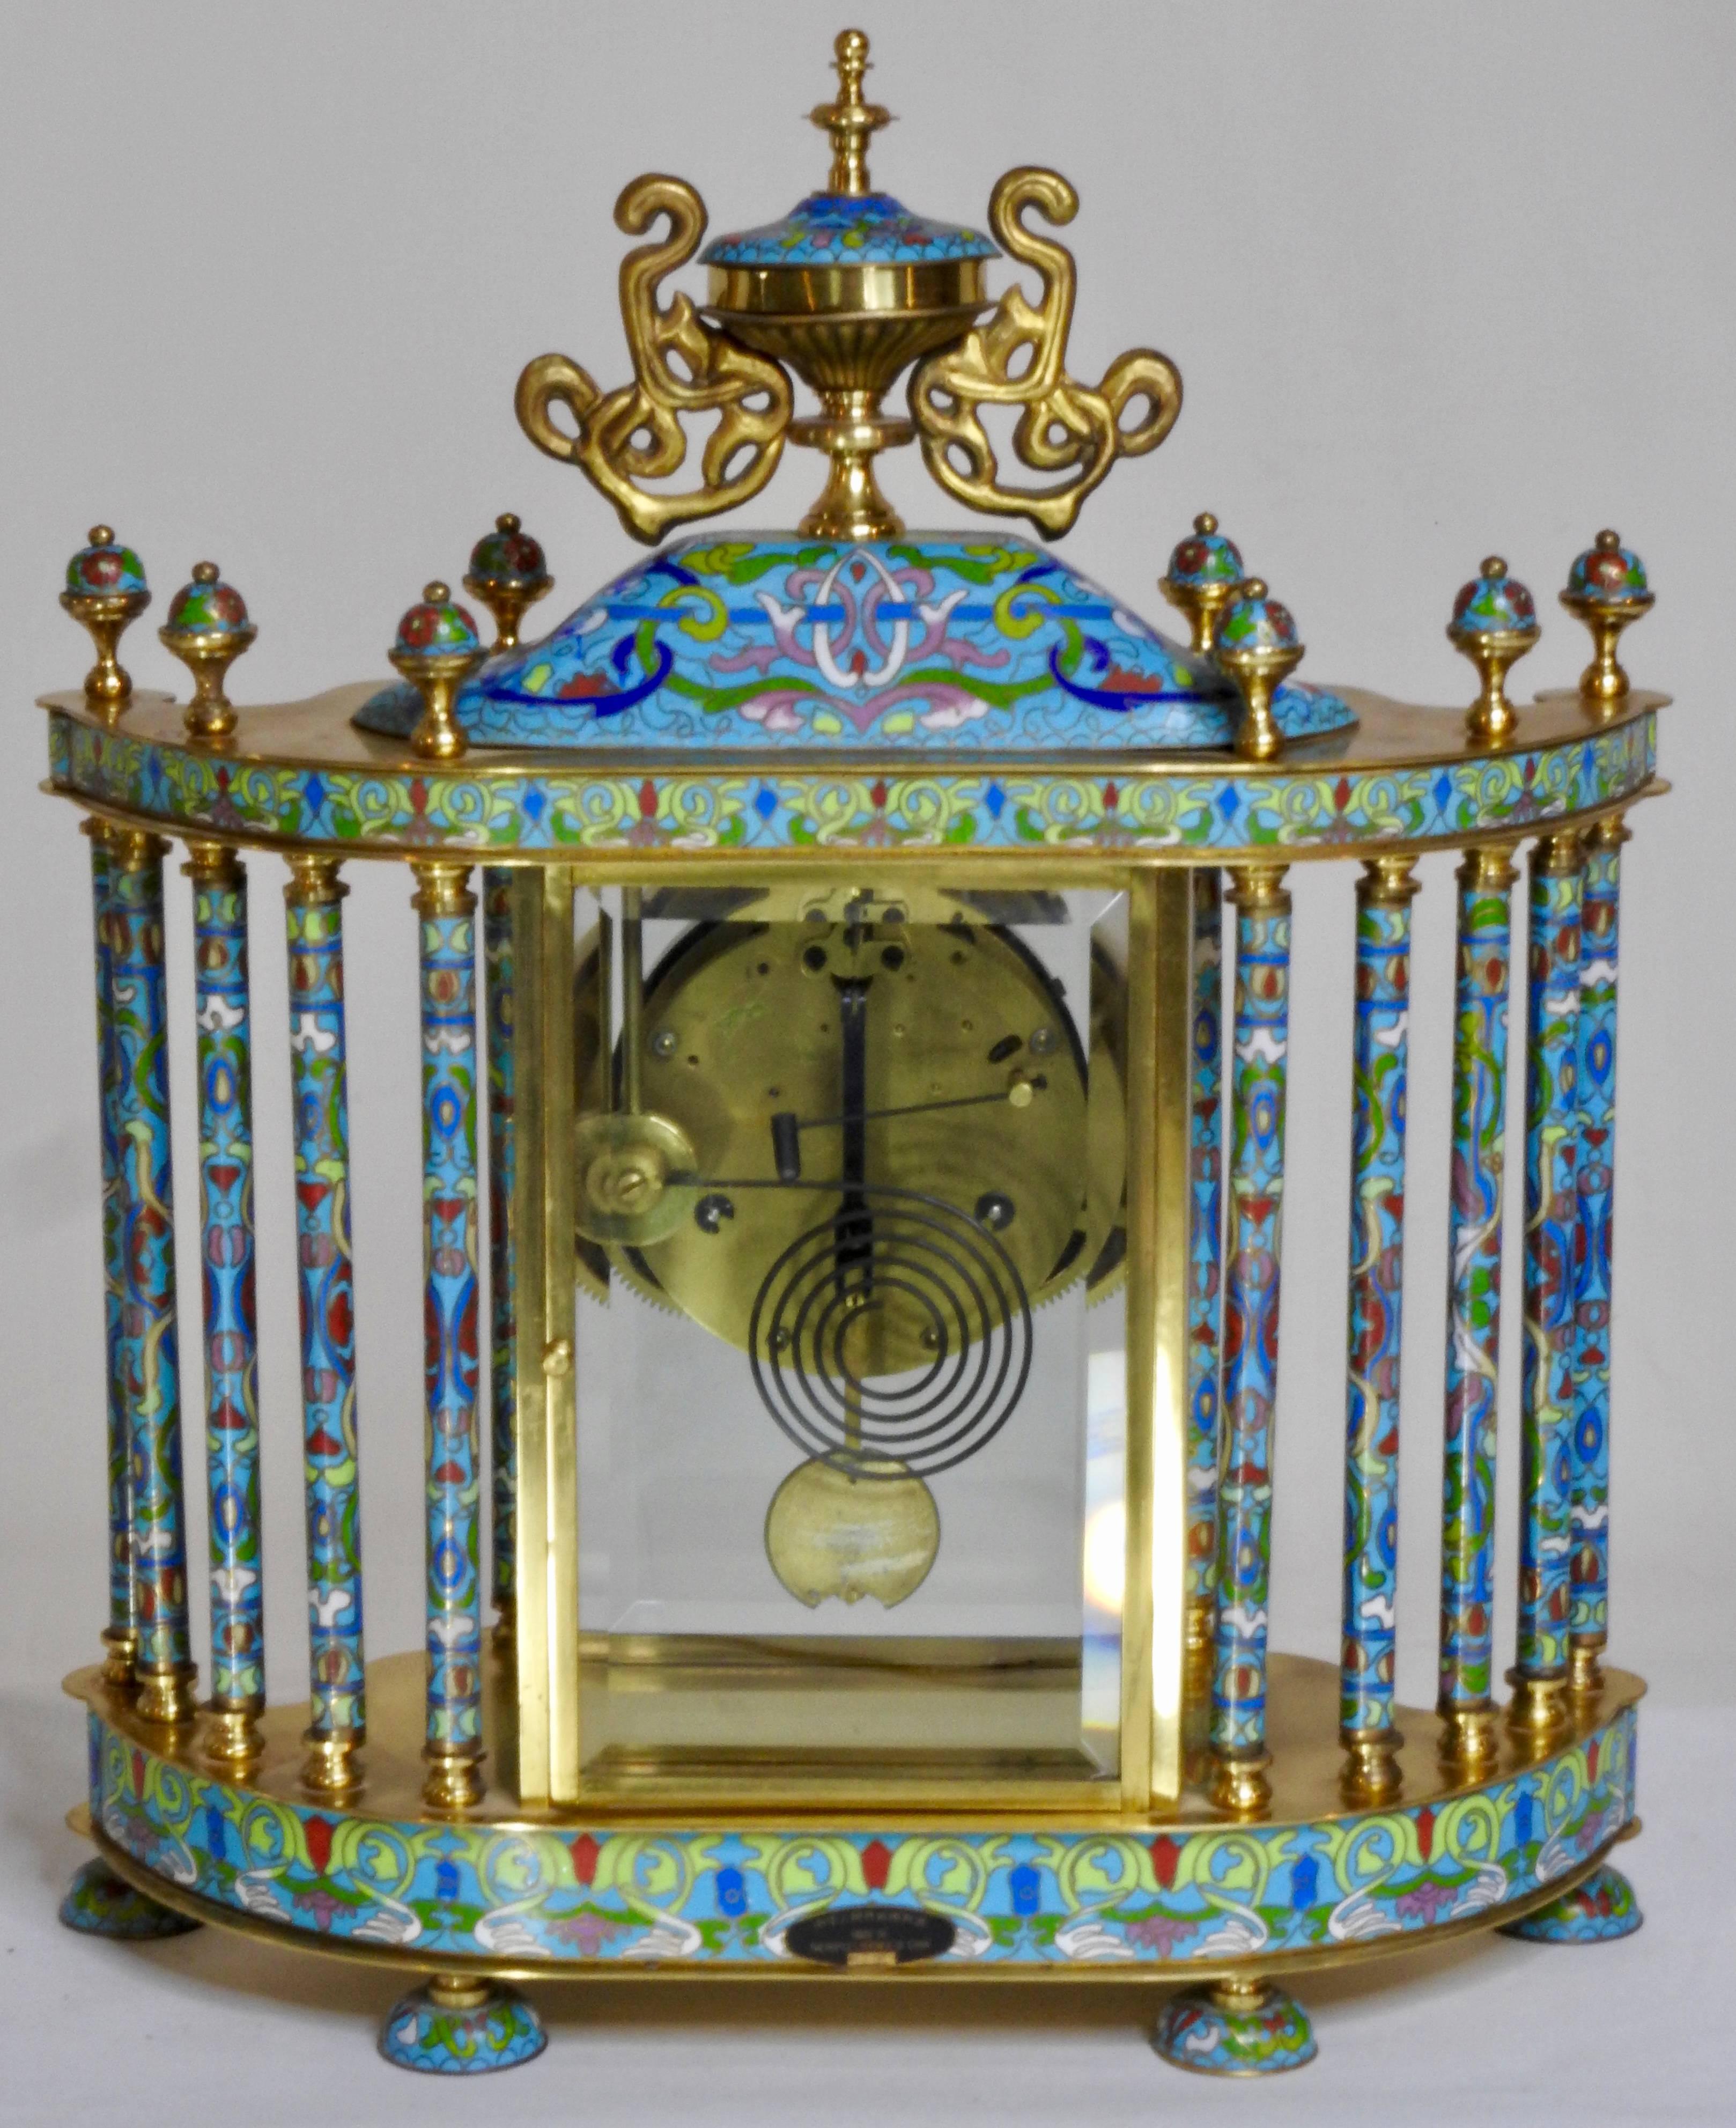 An antique Chinese shelf clock. It is bronze inset with cloisonné. The clock face is decorated with flowers and has black Roman numerals. There is a glass door that opens to a gold tone pendulum. There are ten columns decorated with cloisonné̀ and